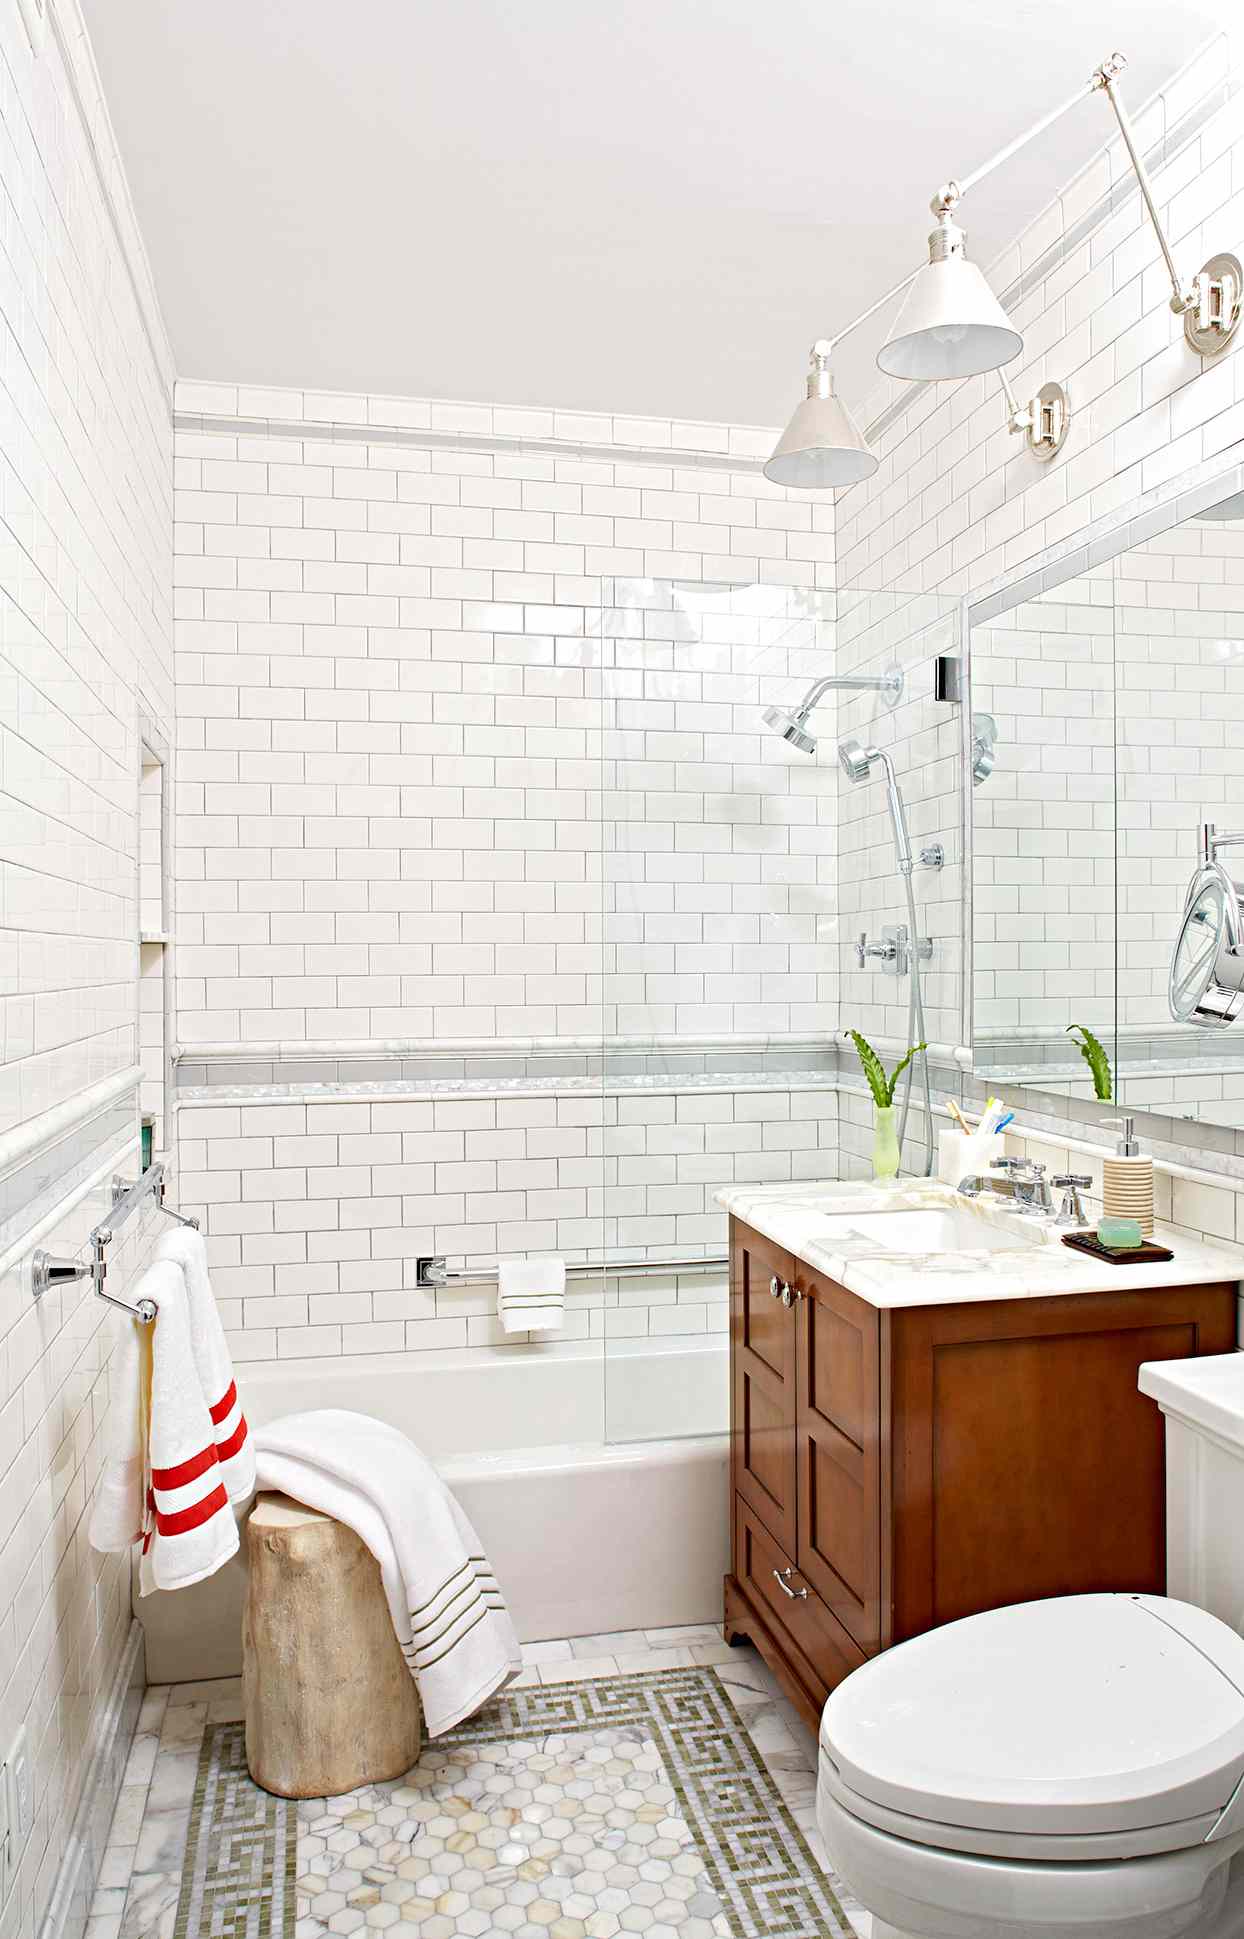 How To Tile A Shower Or Tub Surround